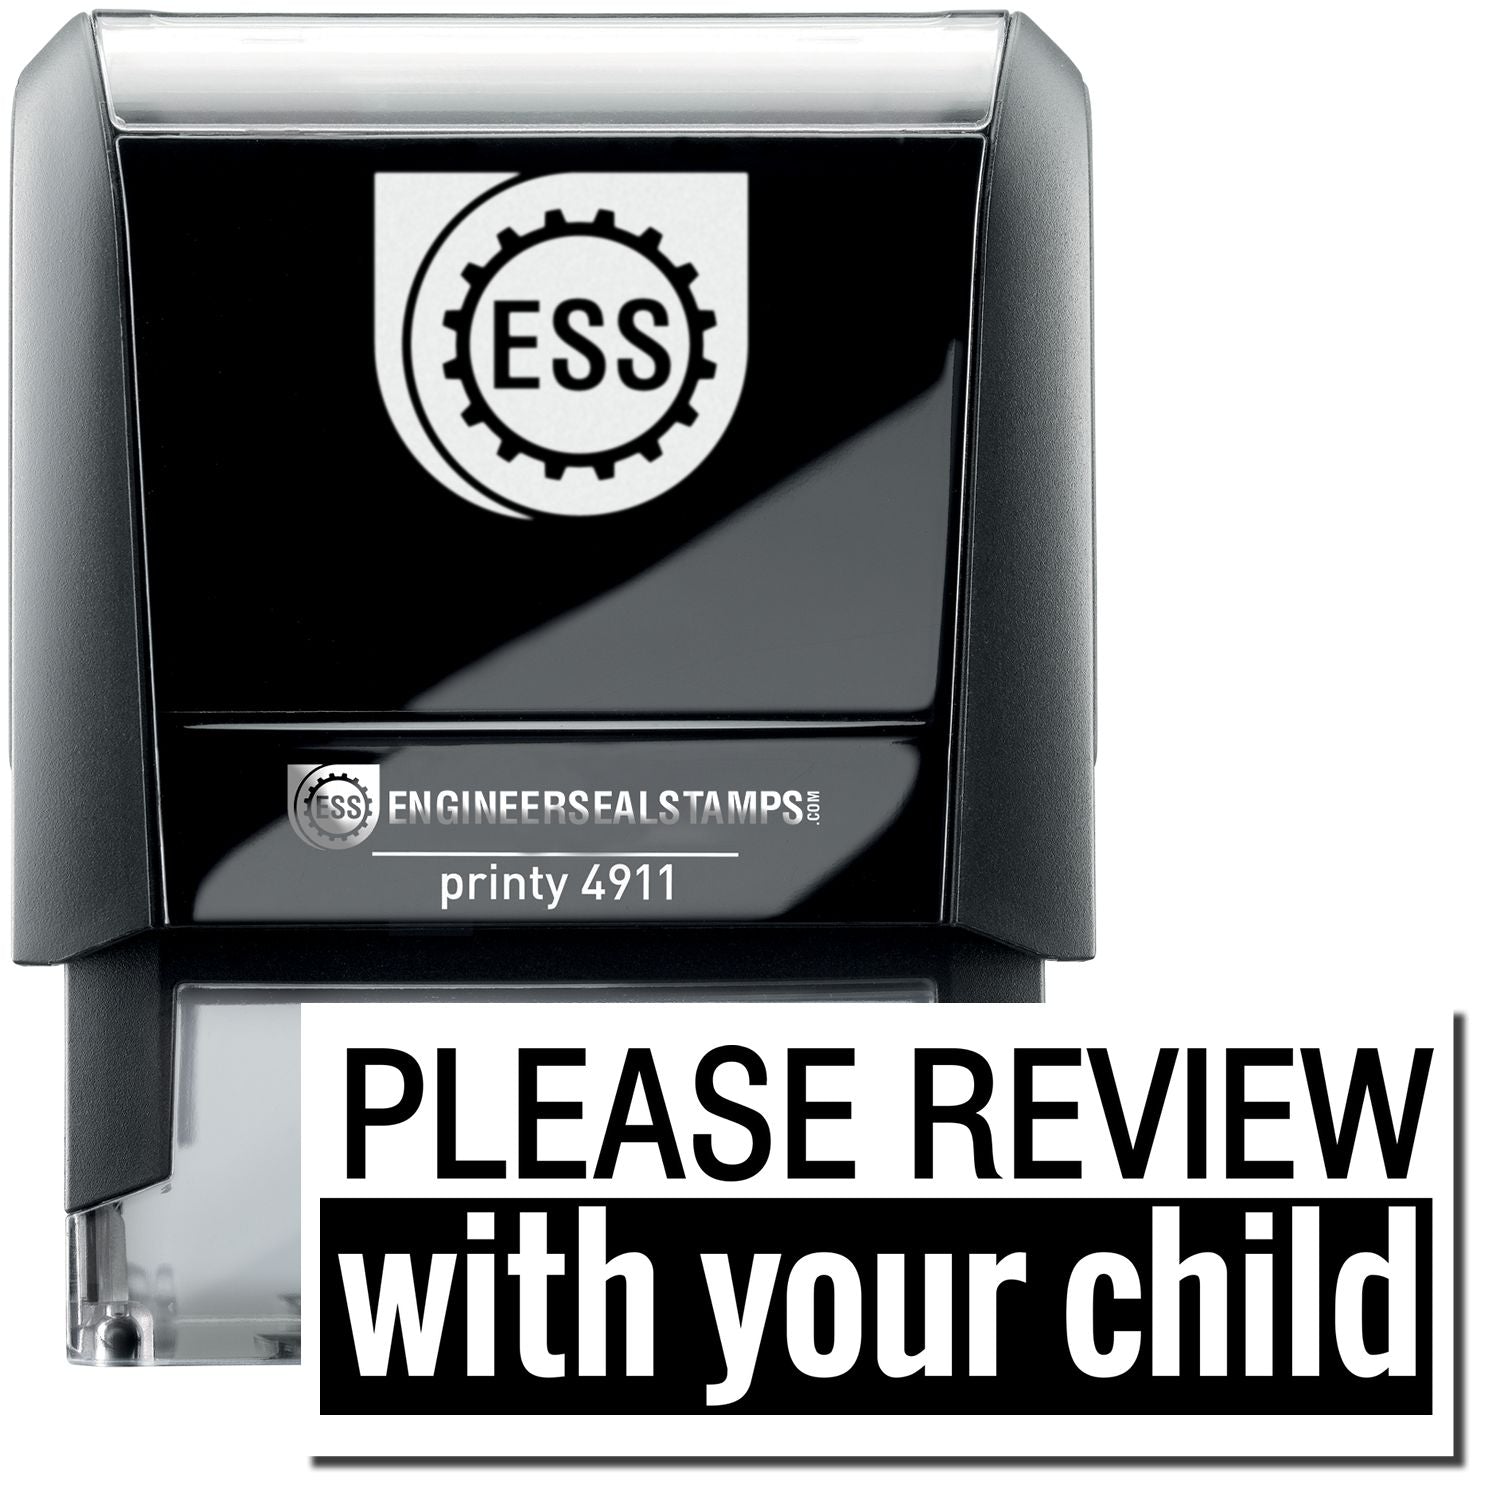 A self-inking stamp with a stamped image showing how the text "PLEASE REVIEW with your child" in a two-color format is displayed after stamping.